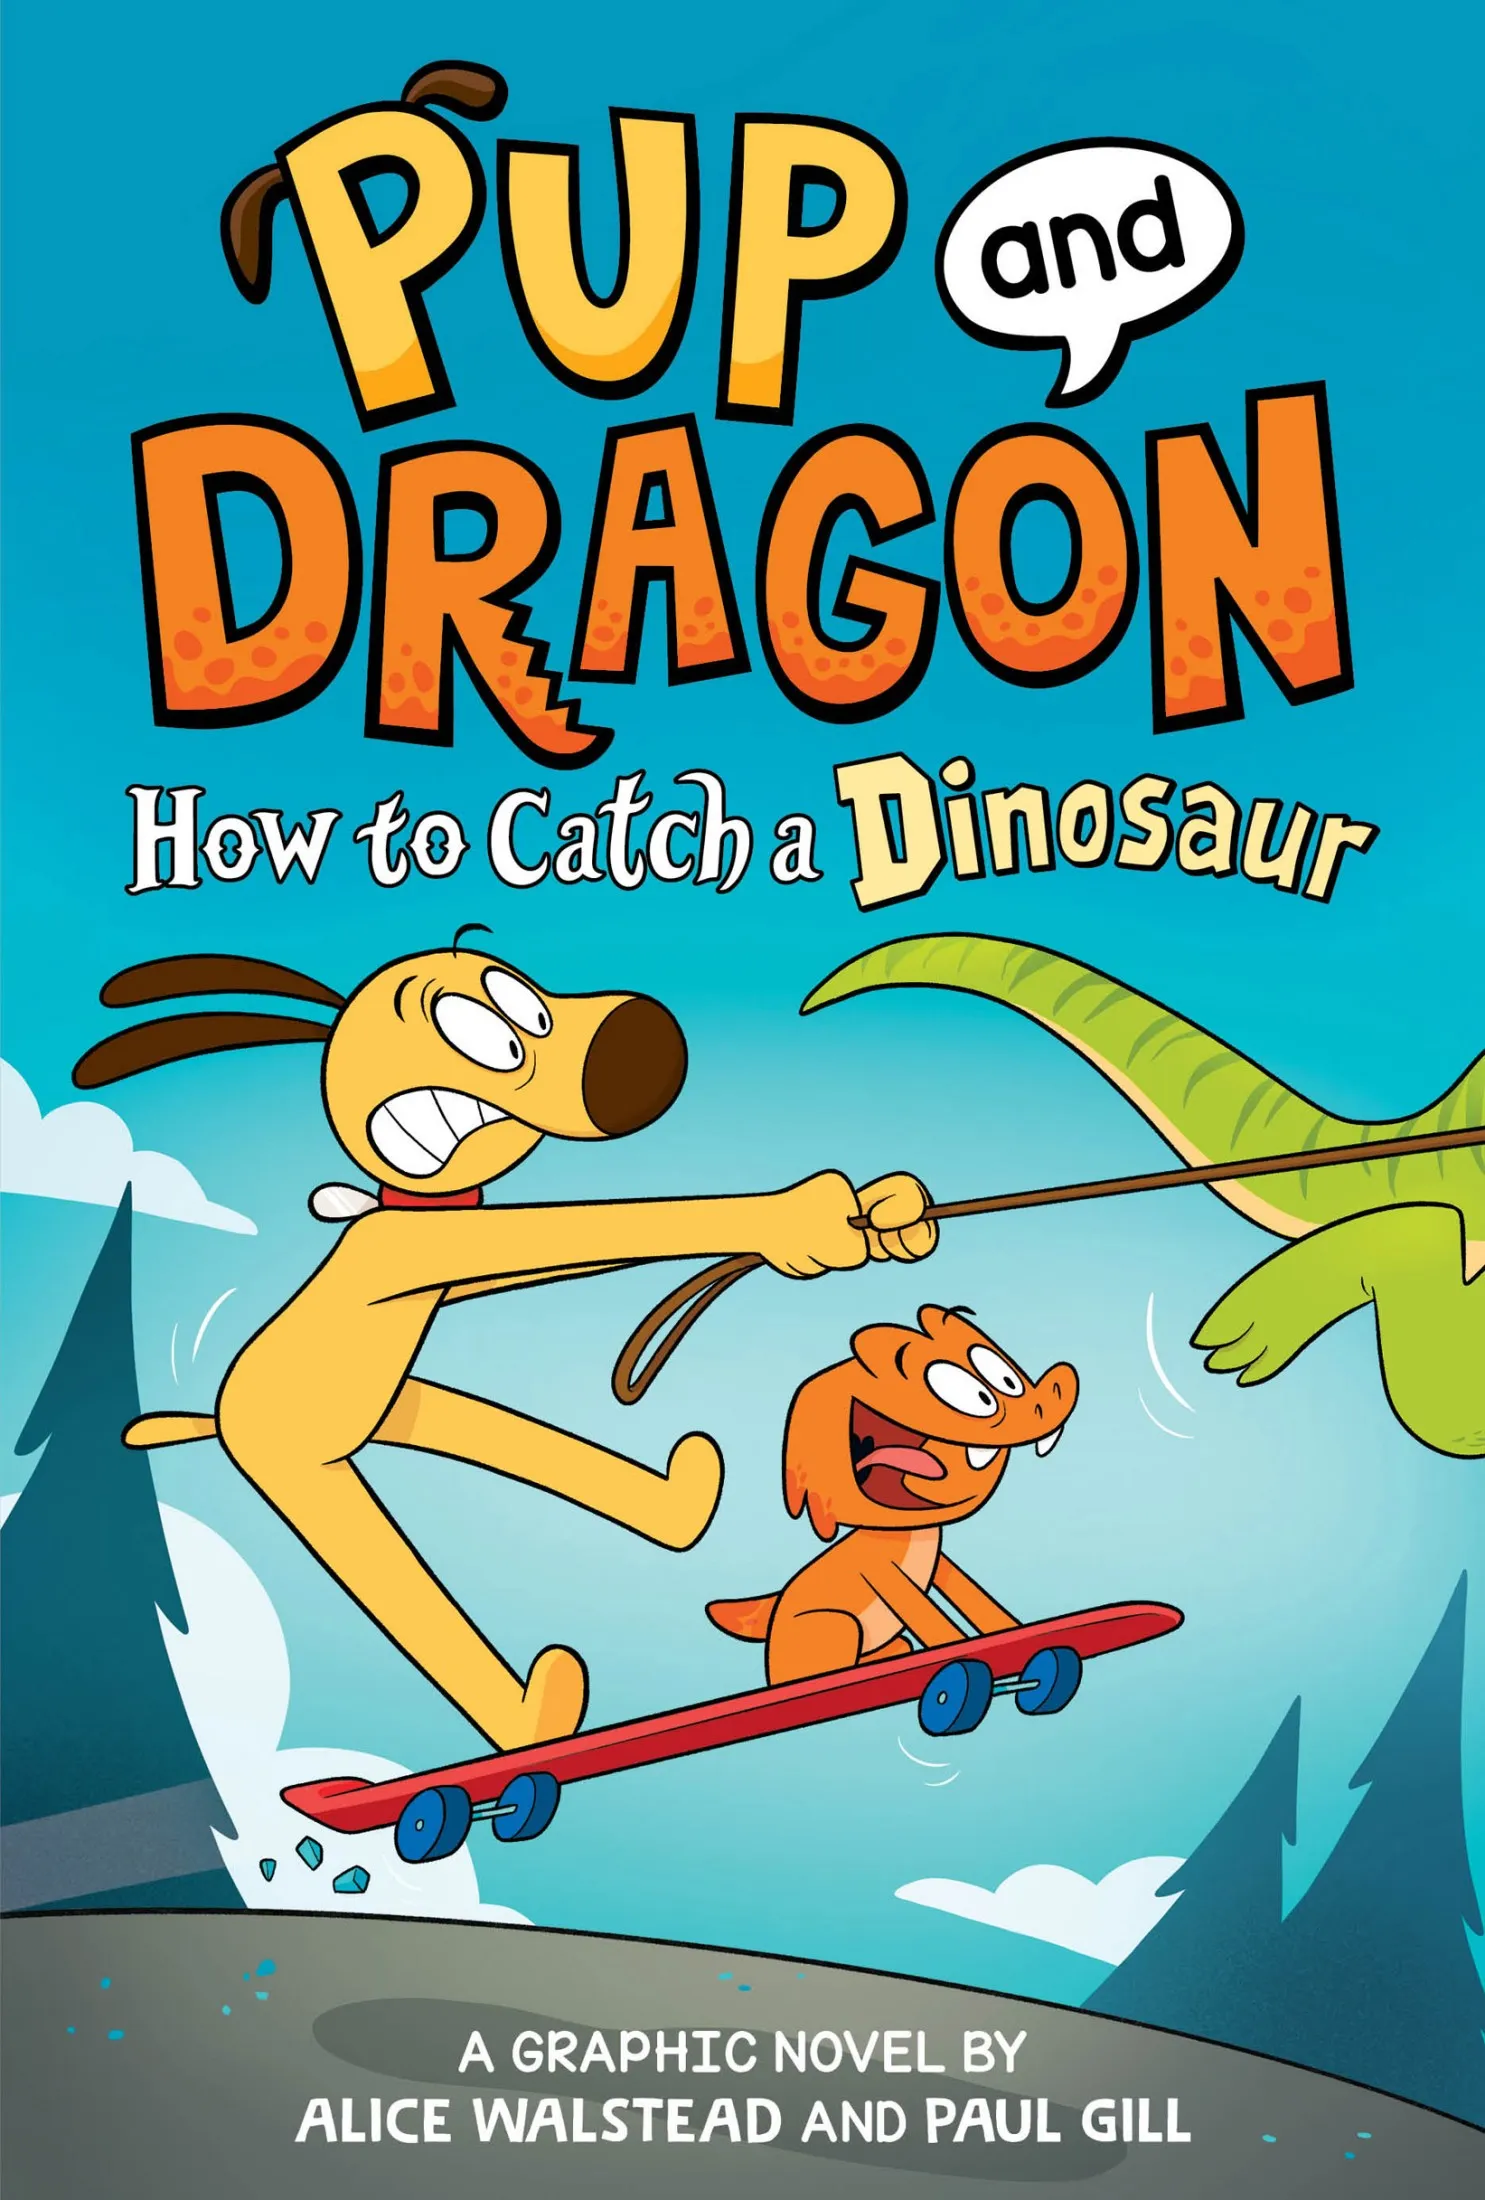 Pup and Dragon: How to Catch a Dinosaur (How to Catch Graphic Novels)